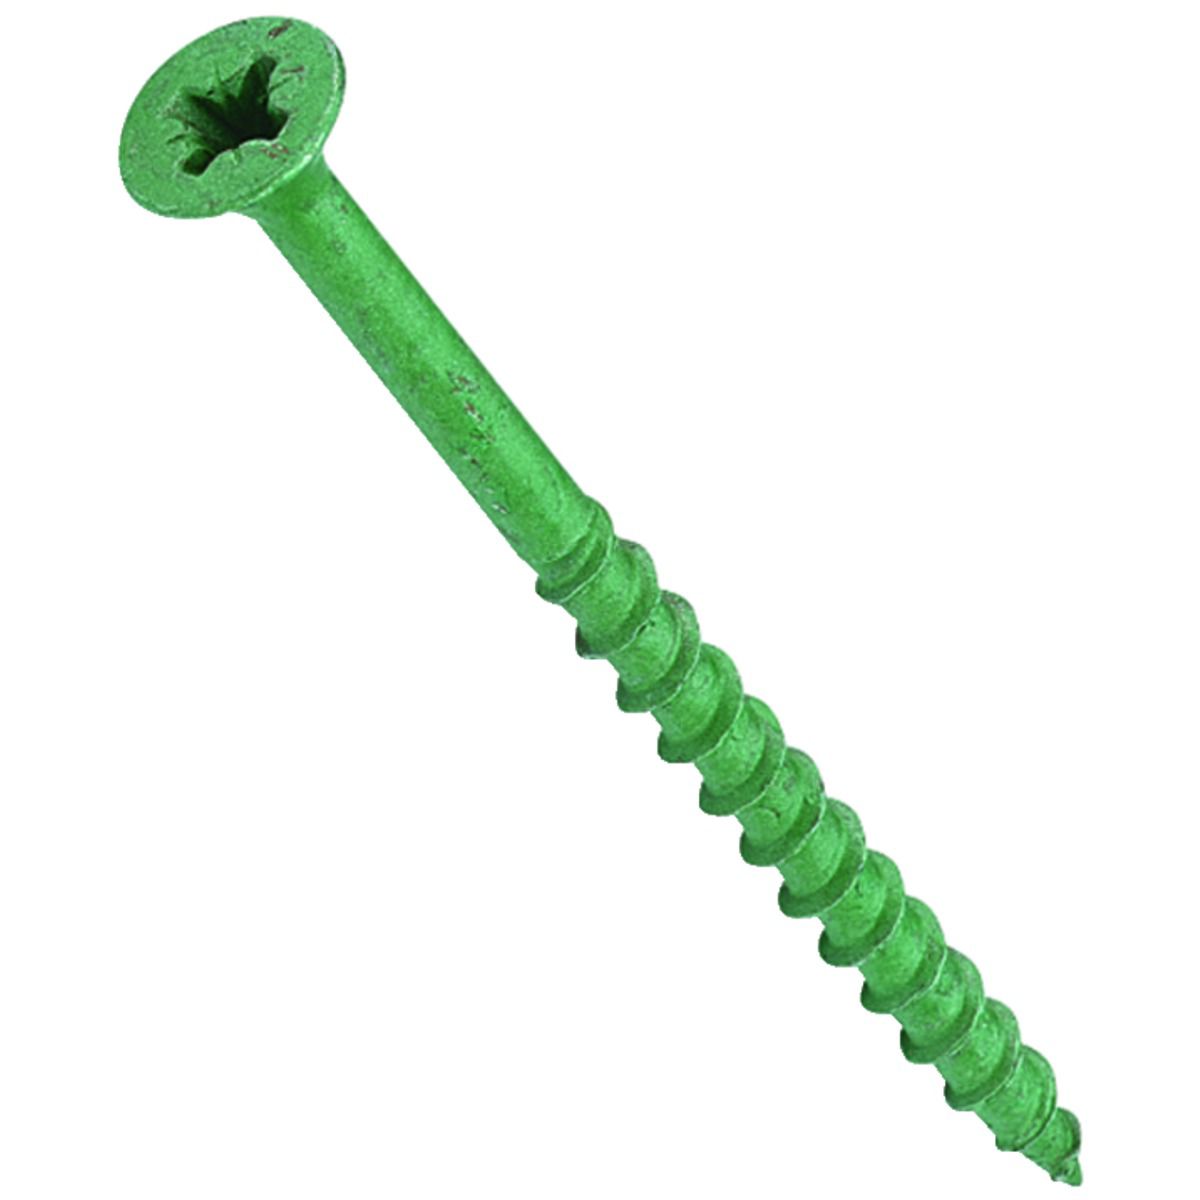 Image of Wickes External Grade Screw - Green No 6 x 19mm Pack of 30